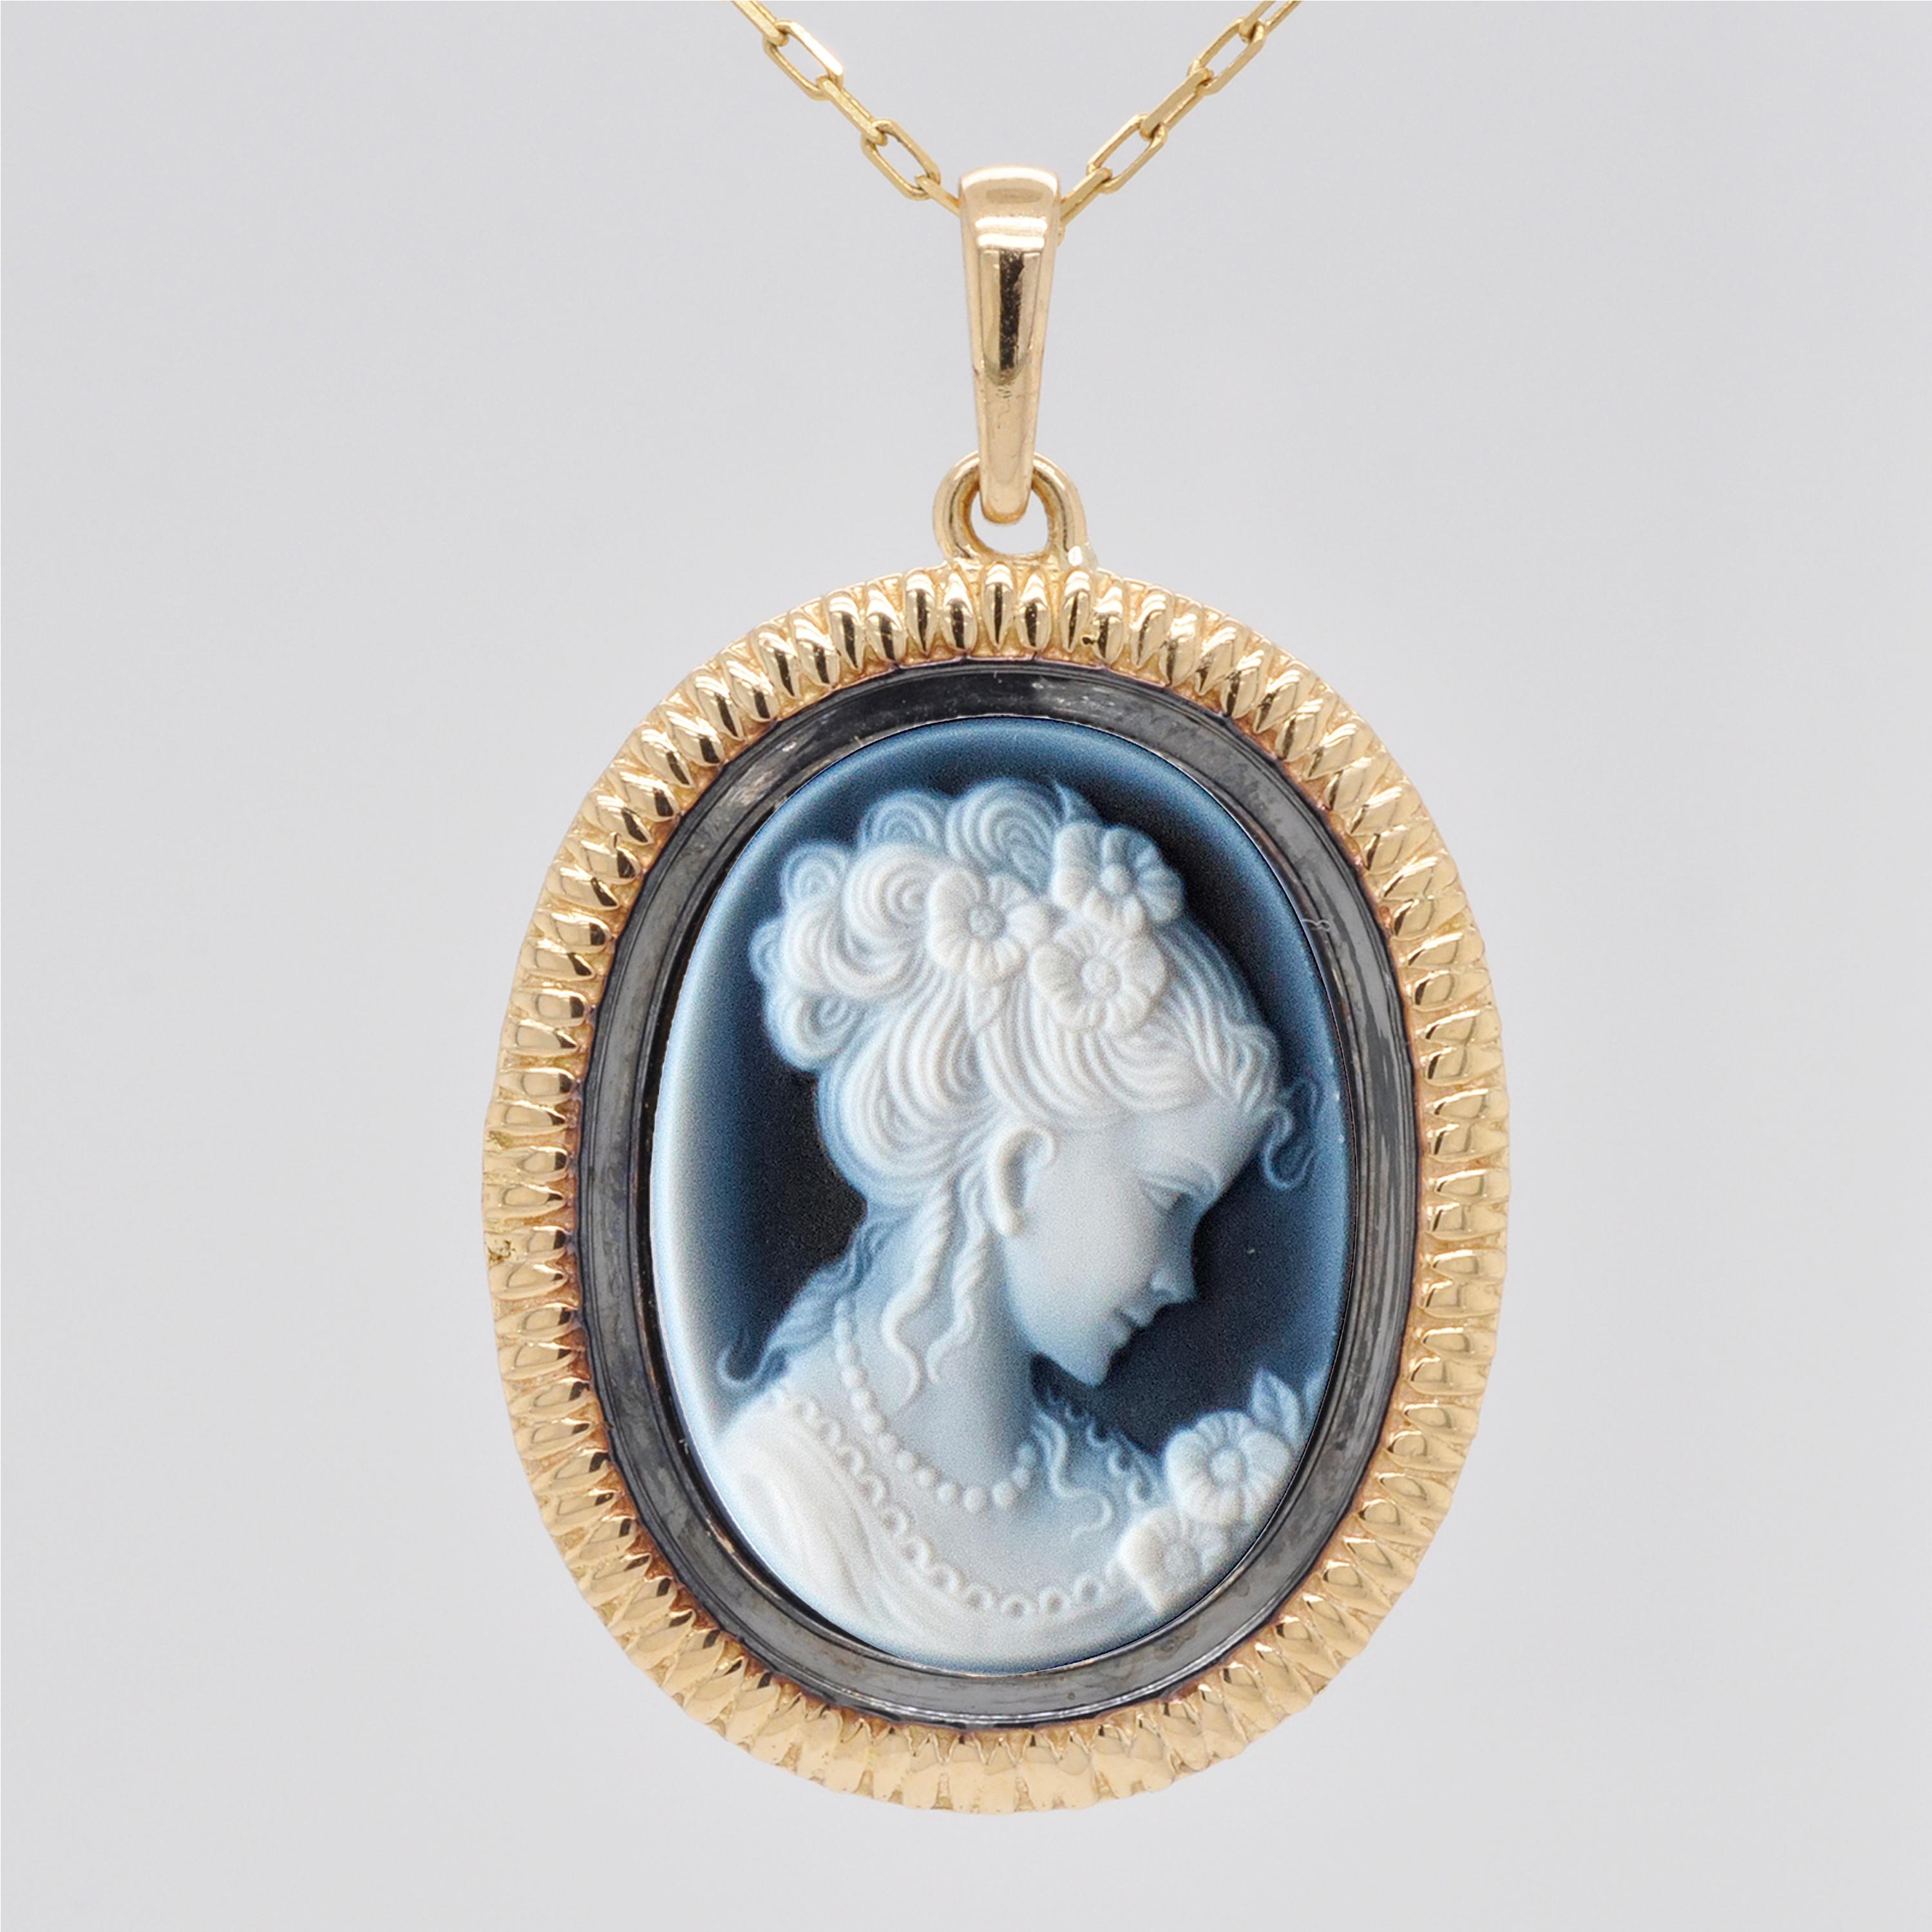 14 karat yellow gold princess lady victorian agate cameo carving pendant necklace

This stunning Victorian Agate Cameo carving pendant necklace is a piece to marvel. The gold frame with gold droplets is patterned in and out to give a solid look to